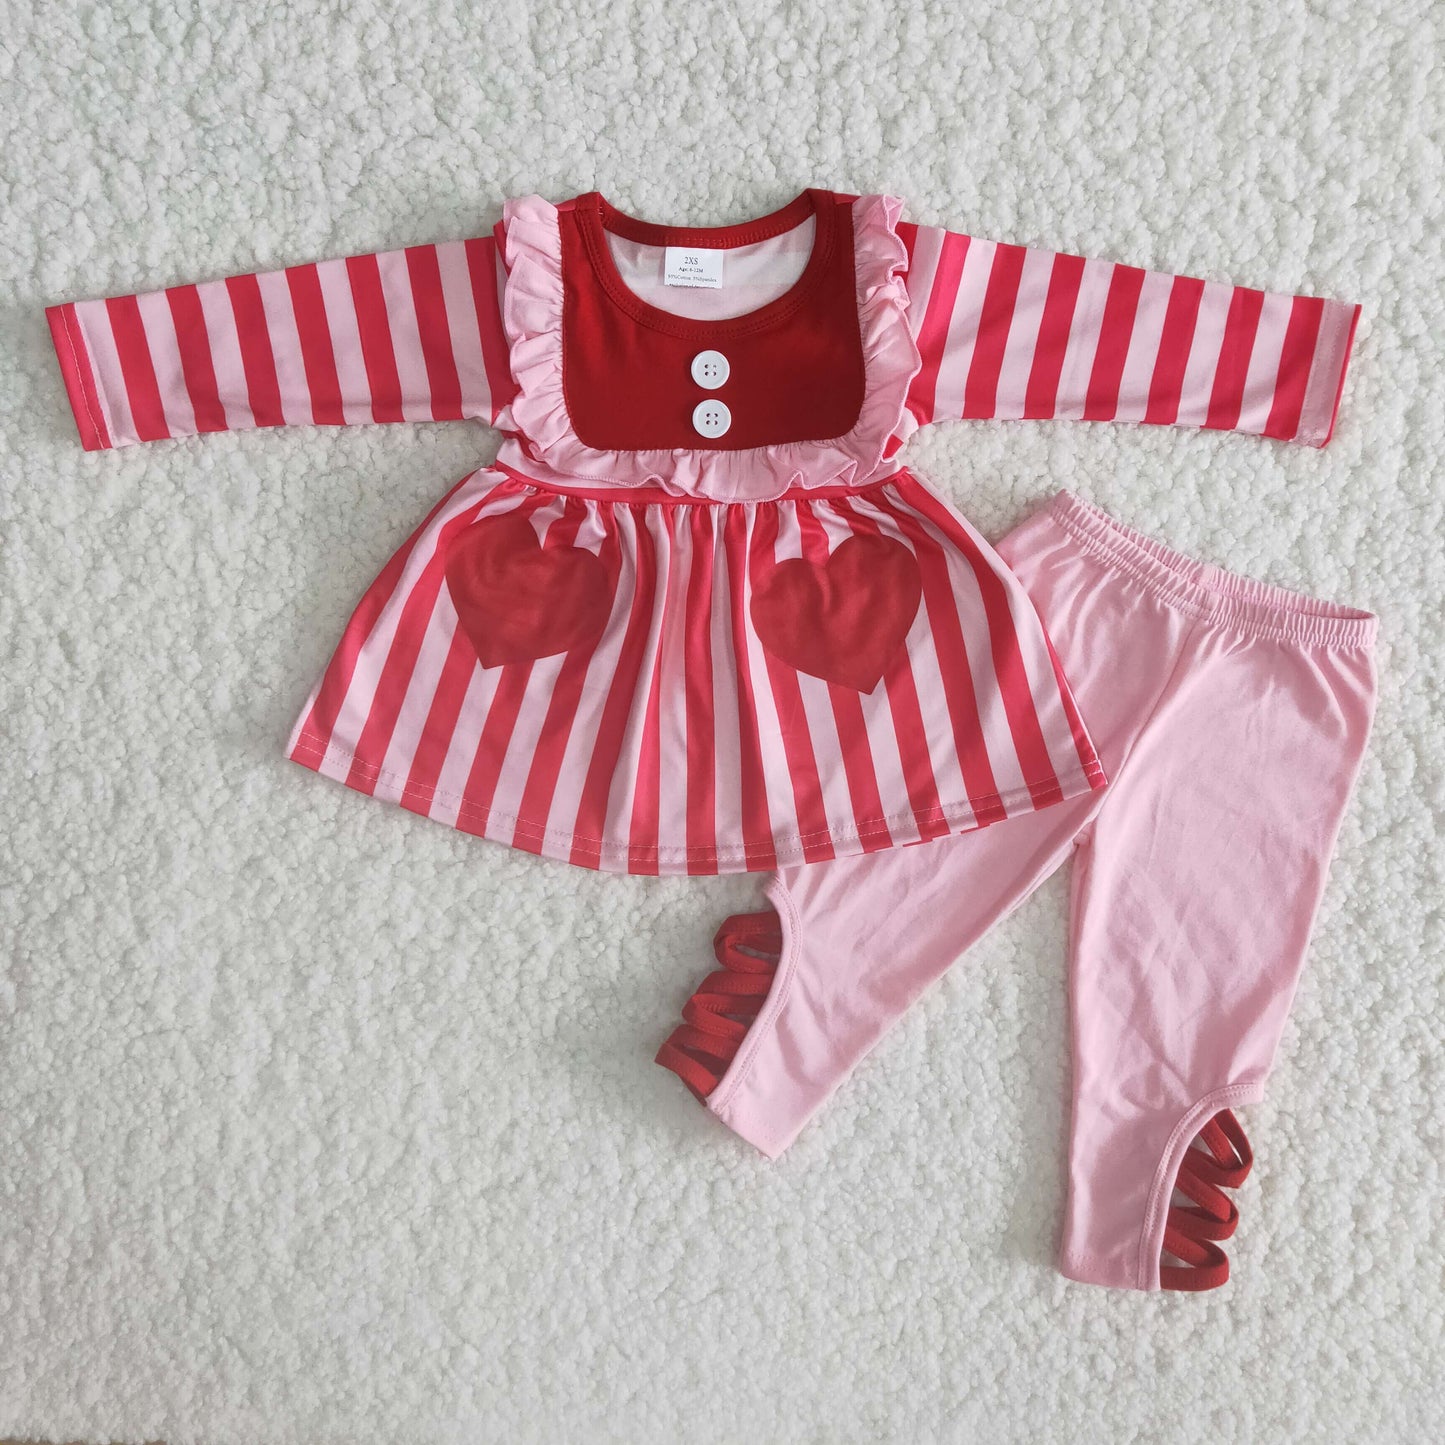 Long sleeve legging pants Valentines outfits  6 B11-22